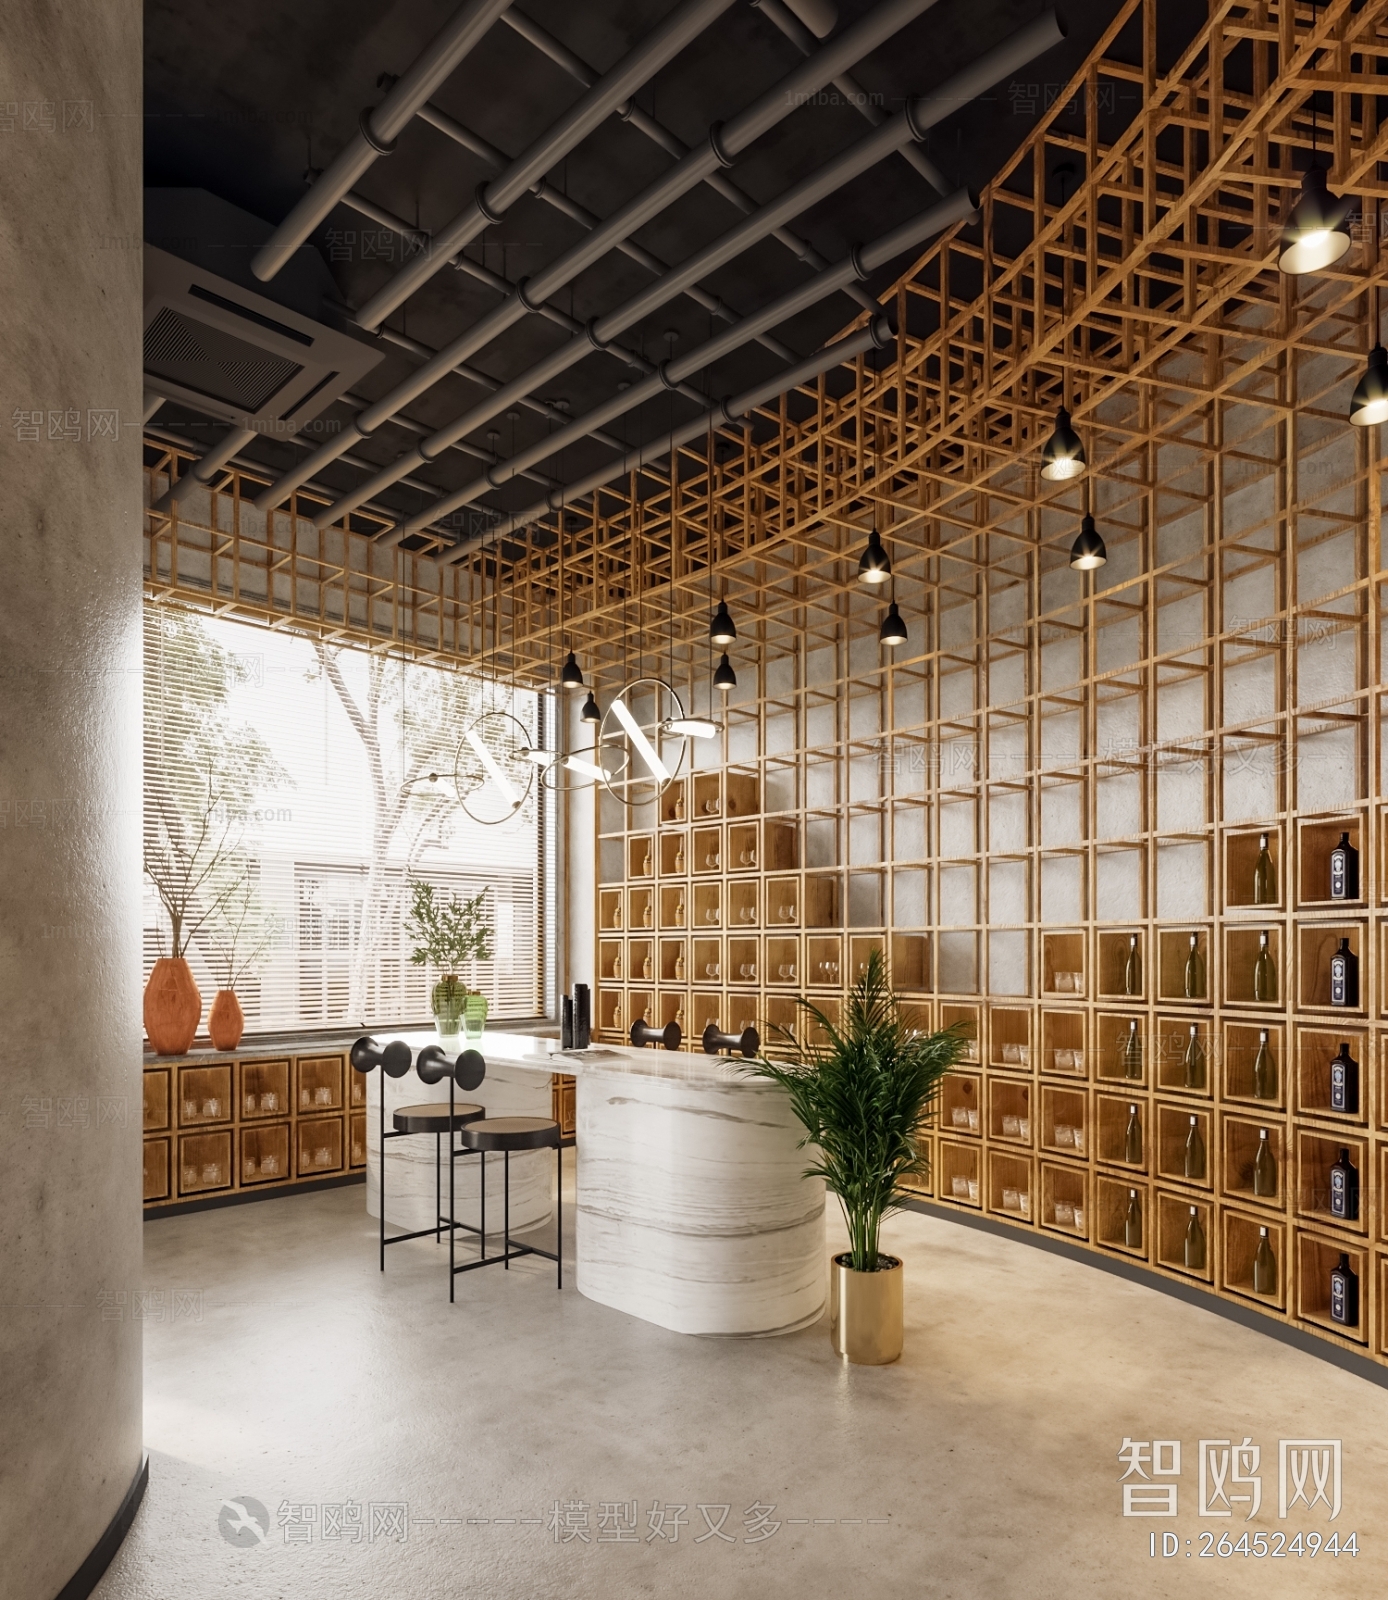 Industrial Style Retail Stores